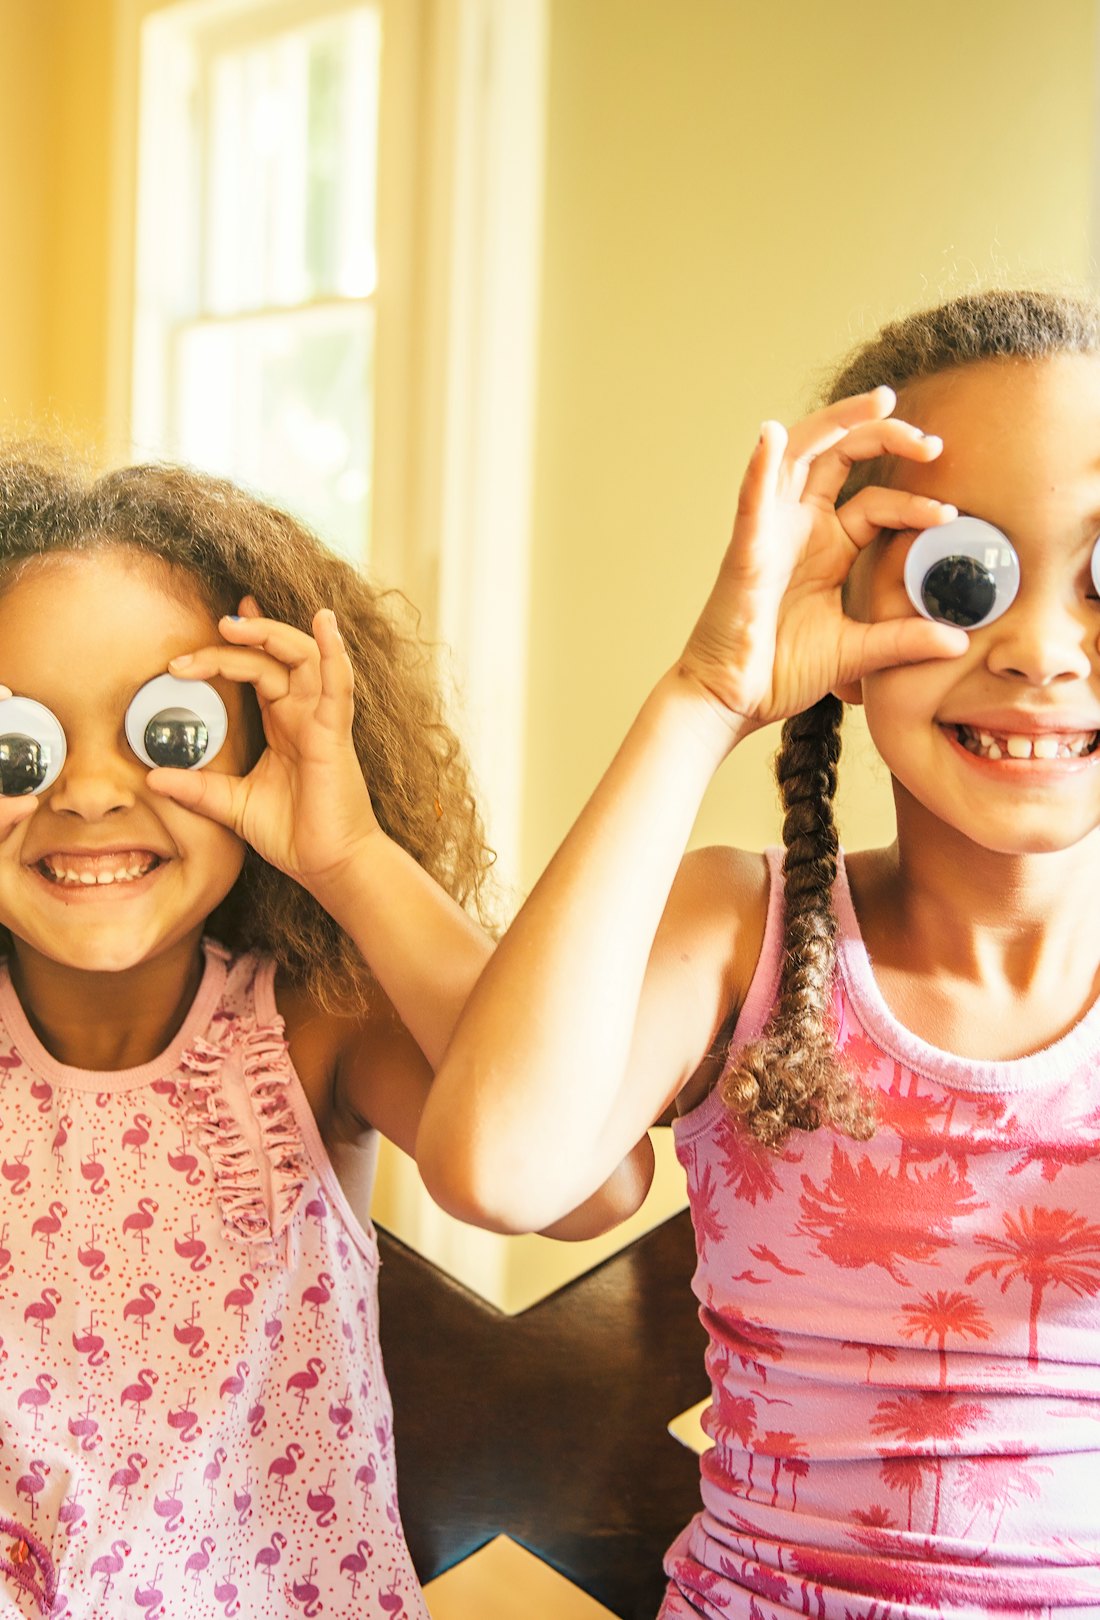 Two girls holding large googly eyes over their eyes and smiling